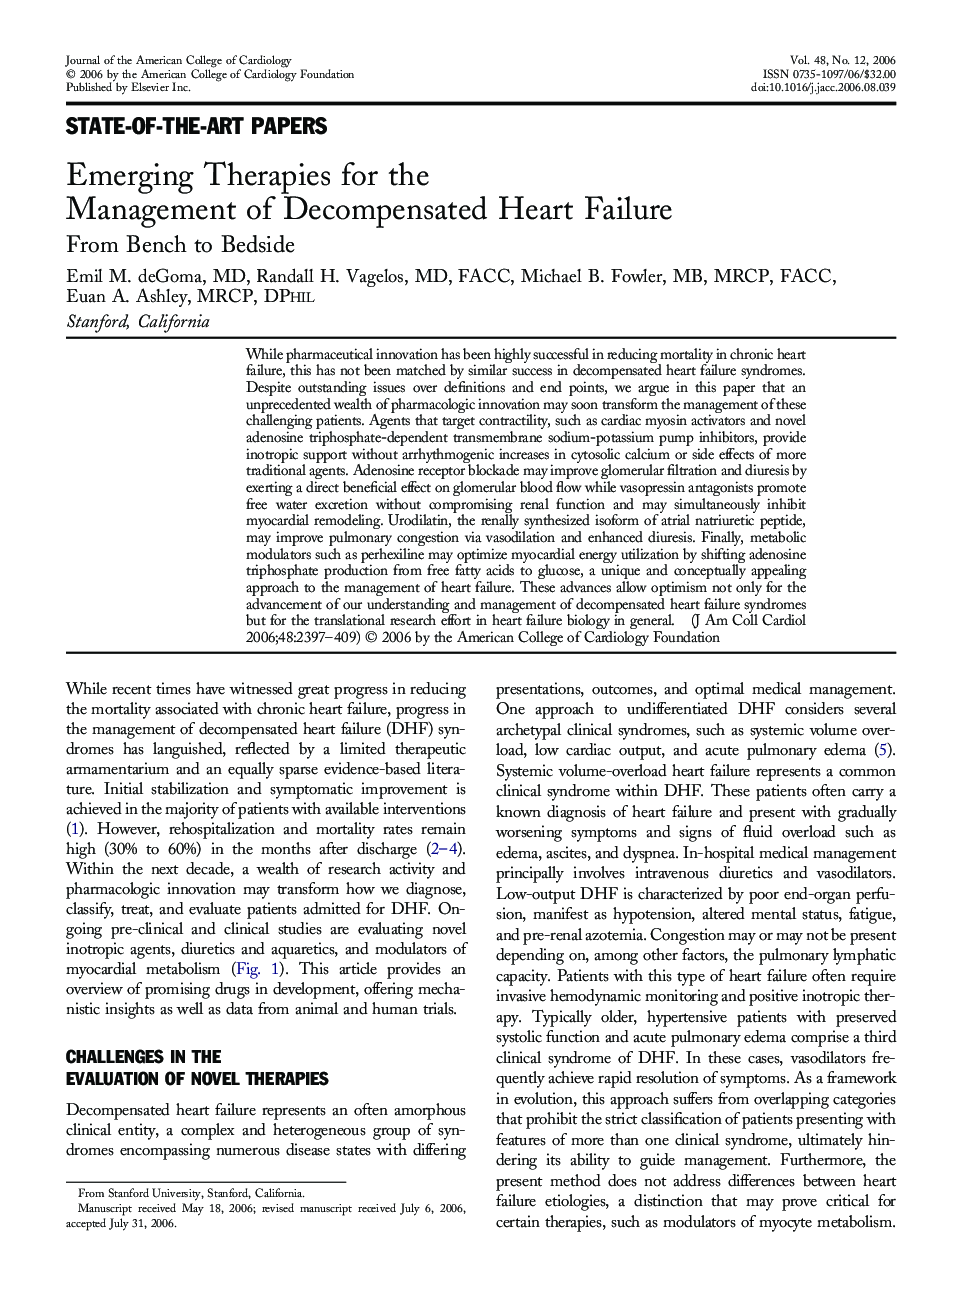 Emerging Therapies for the Management of Decompensated Heart Failure: From Bench to Bedside